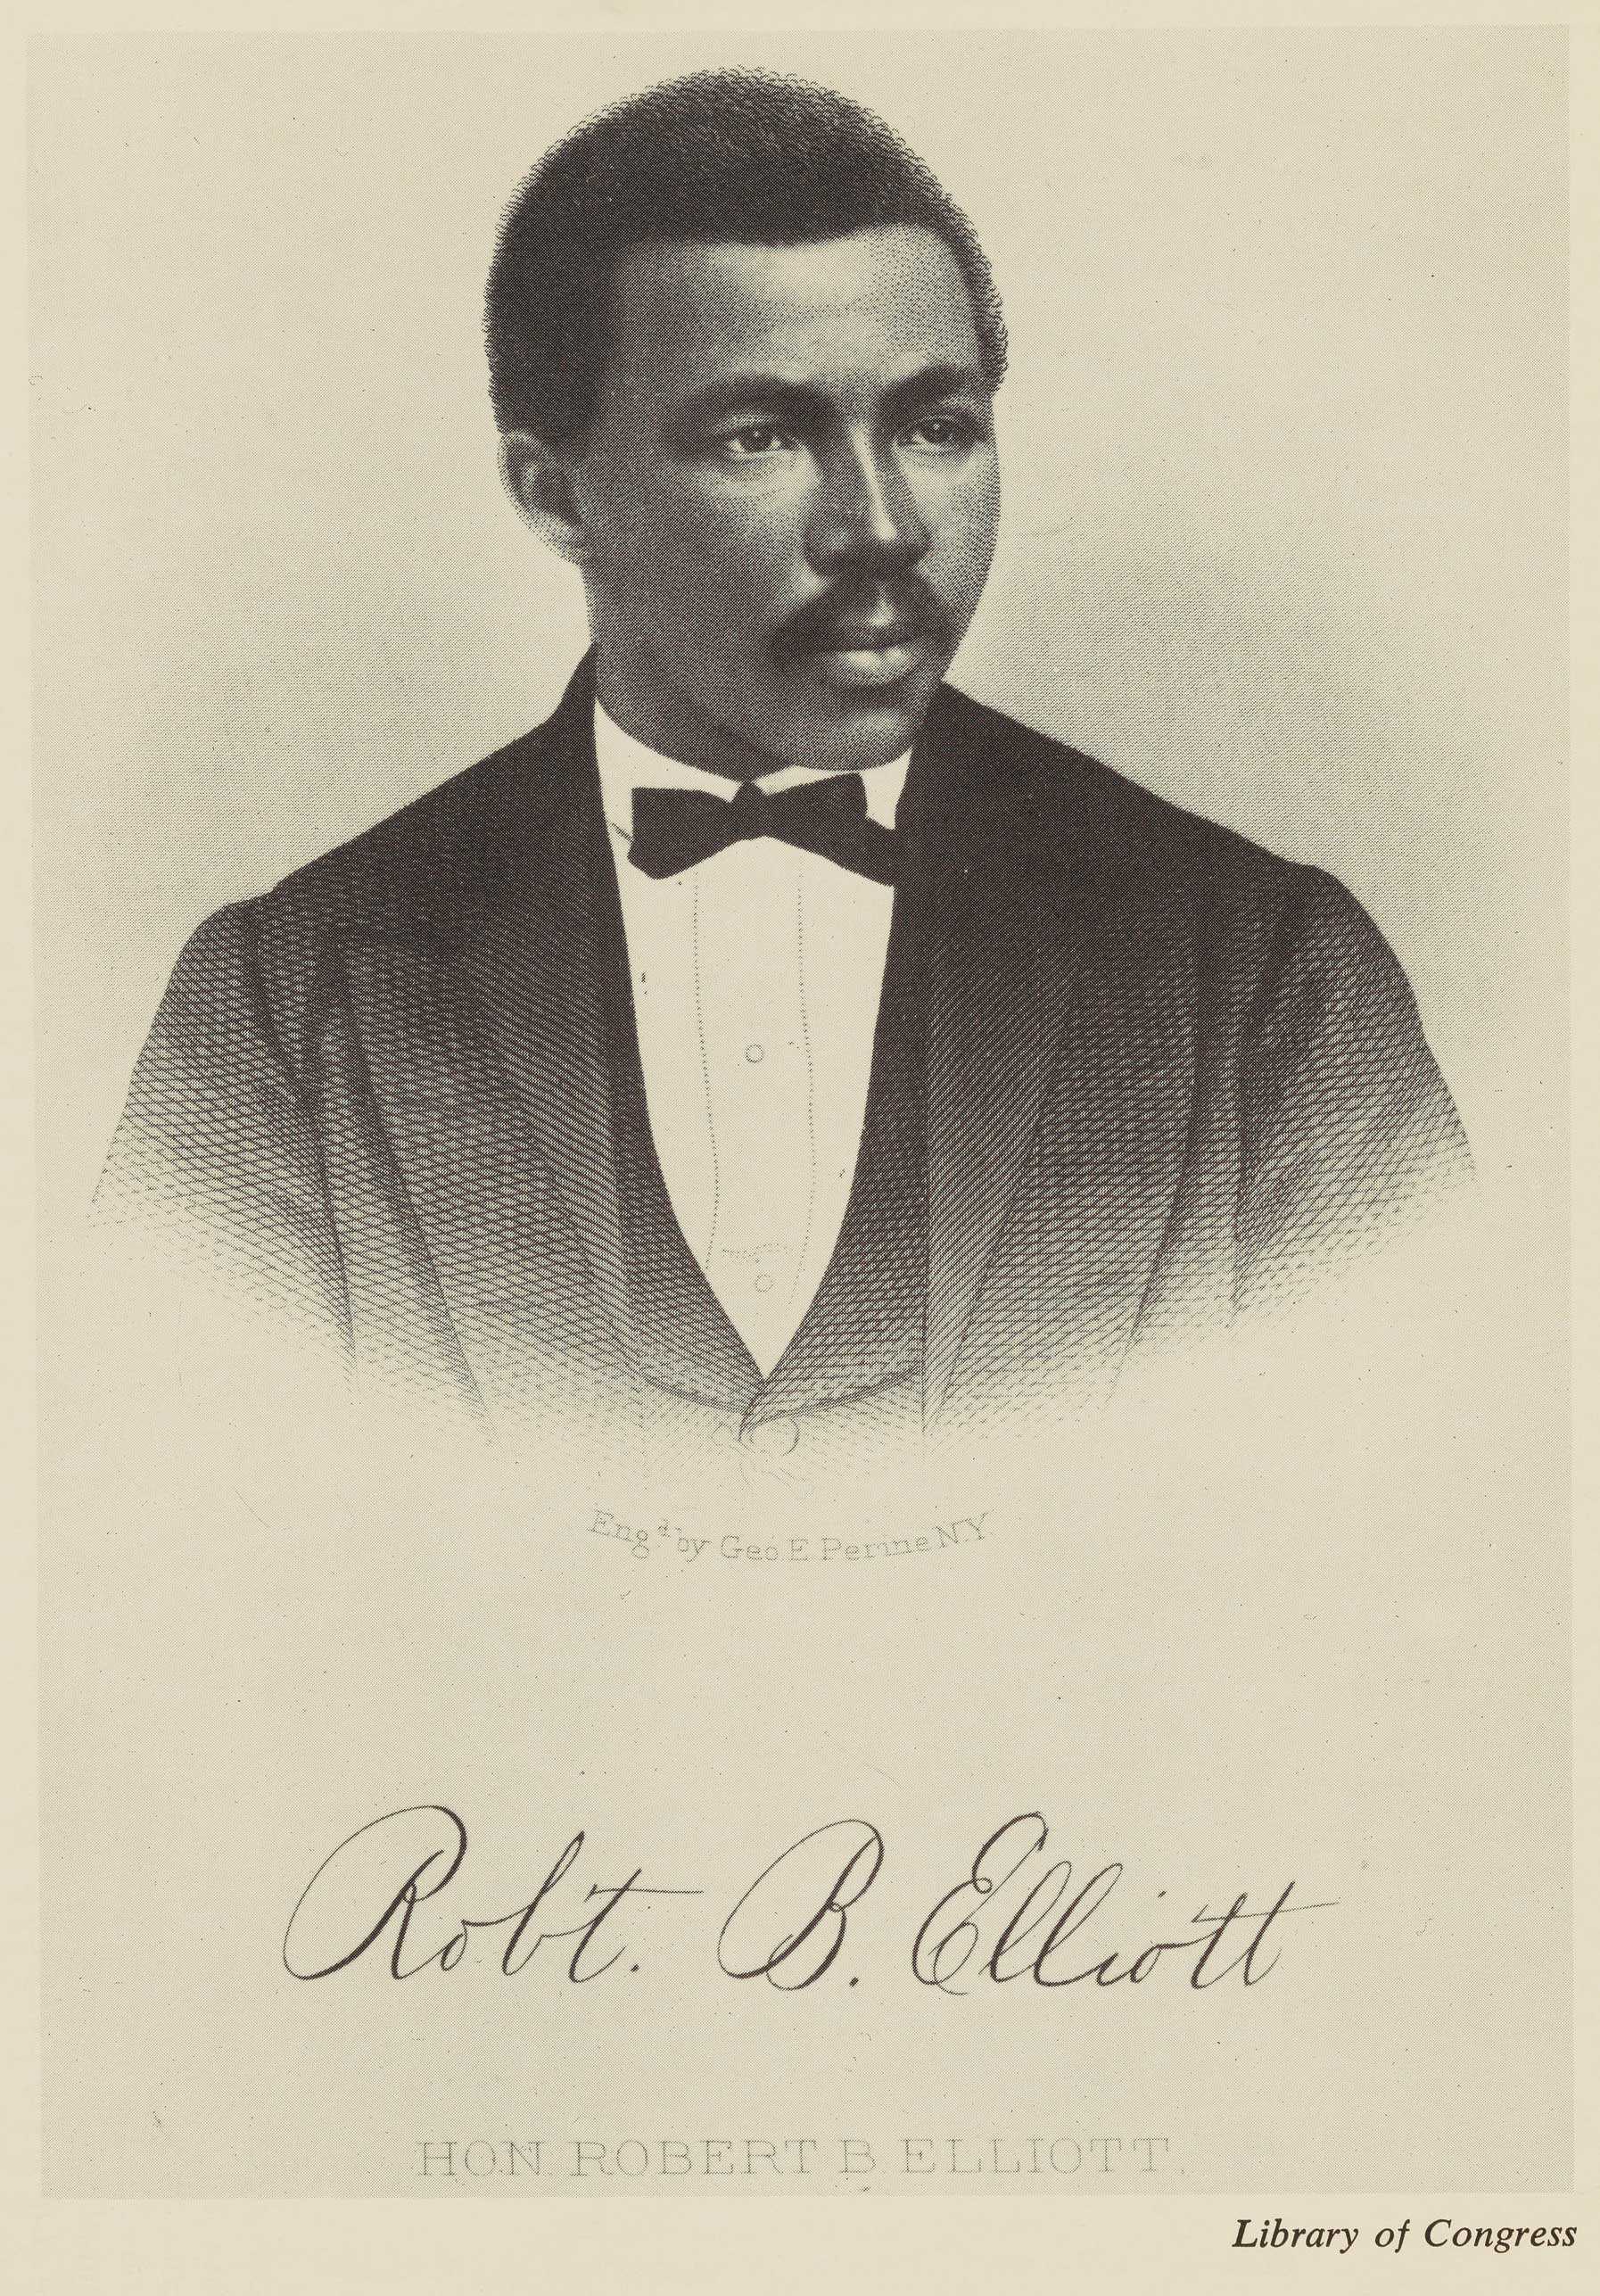 An print of Robert B. Elliott's portrait. He is dressed in a tux. His portrait fading at the bottom.